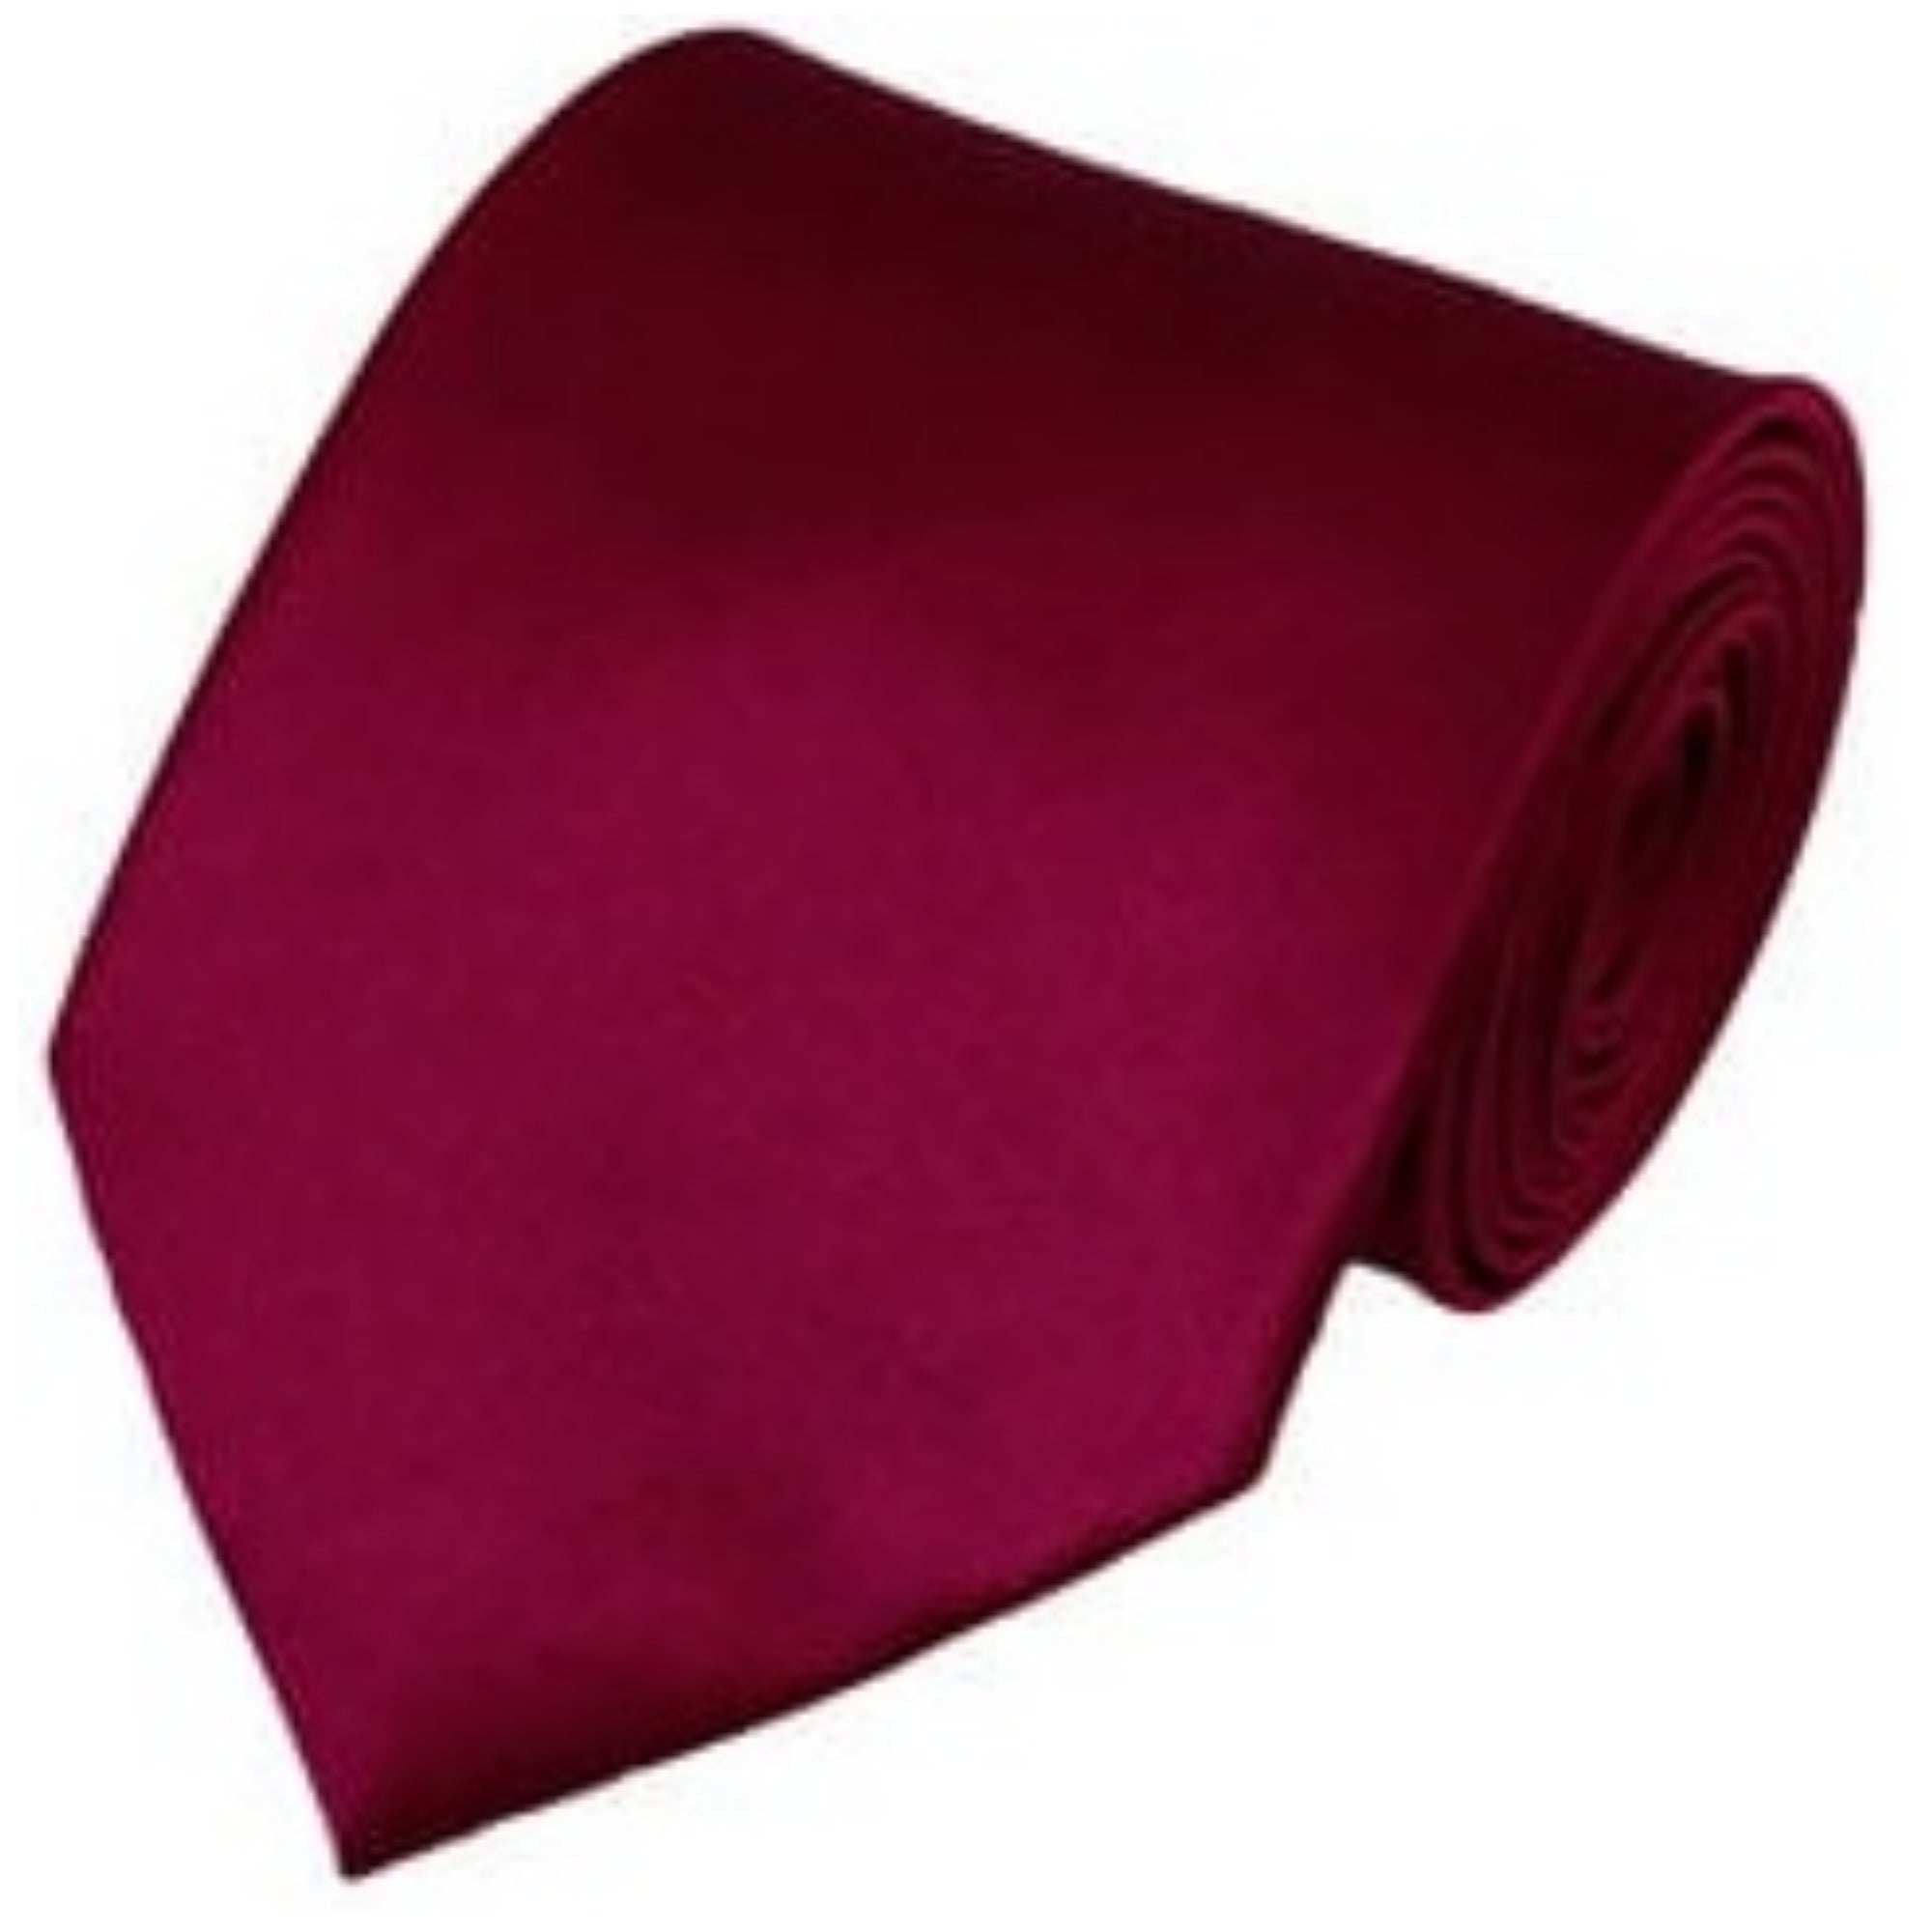 TheDapperTie Solid Color 3.5 Inch Wide And 62 Inch Extra Long Necktie For Big & Tall Men Neck Tie TheDapperTie Raspberry  